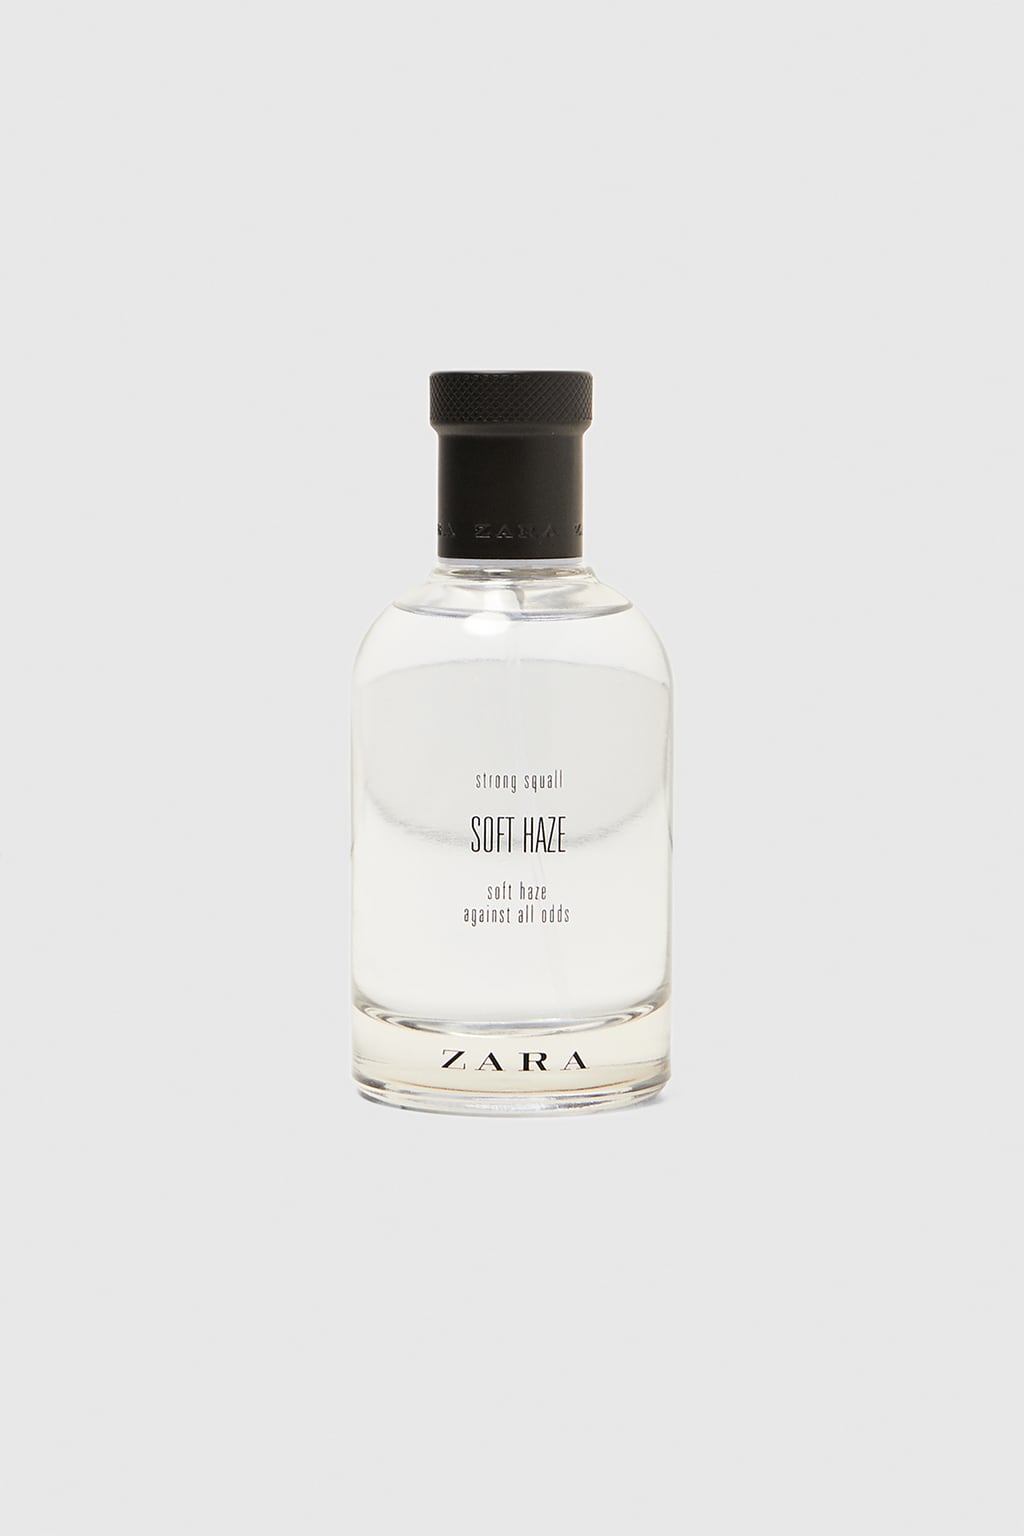 zara mens aftershave smells like creed